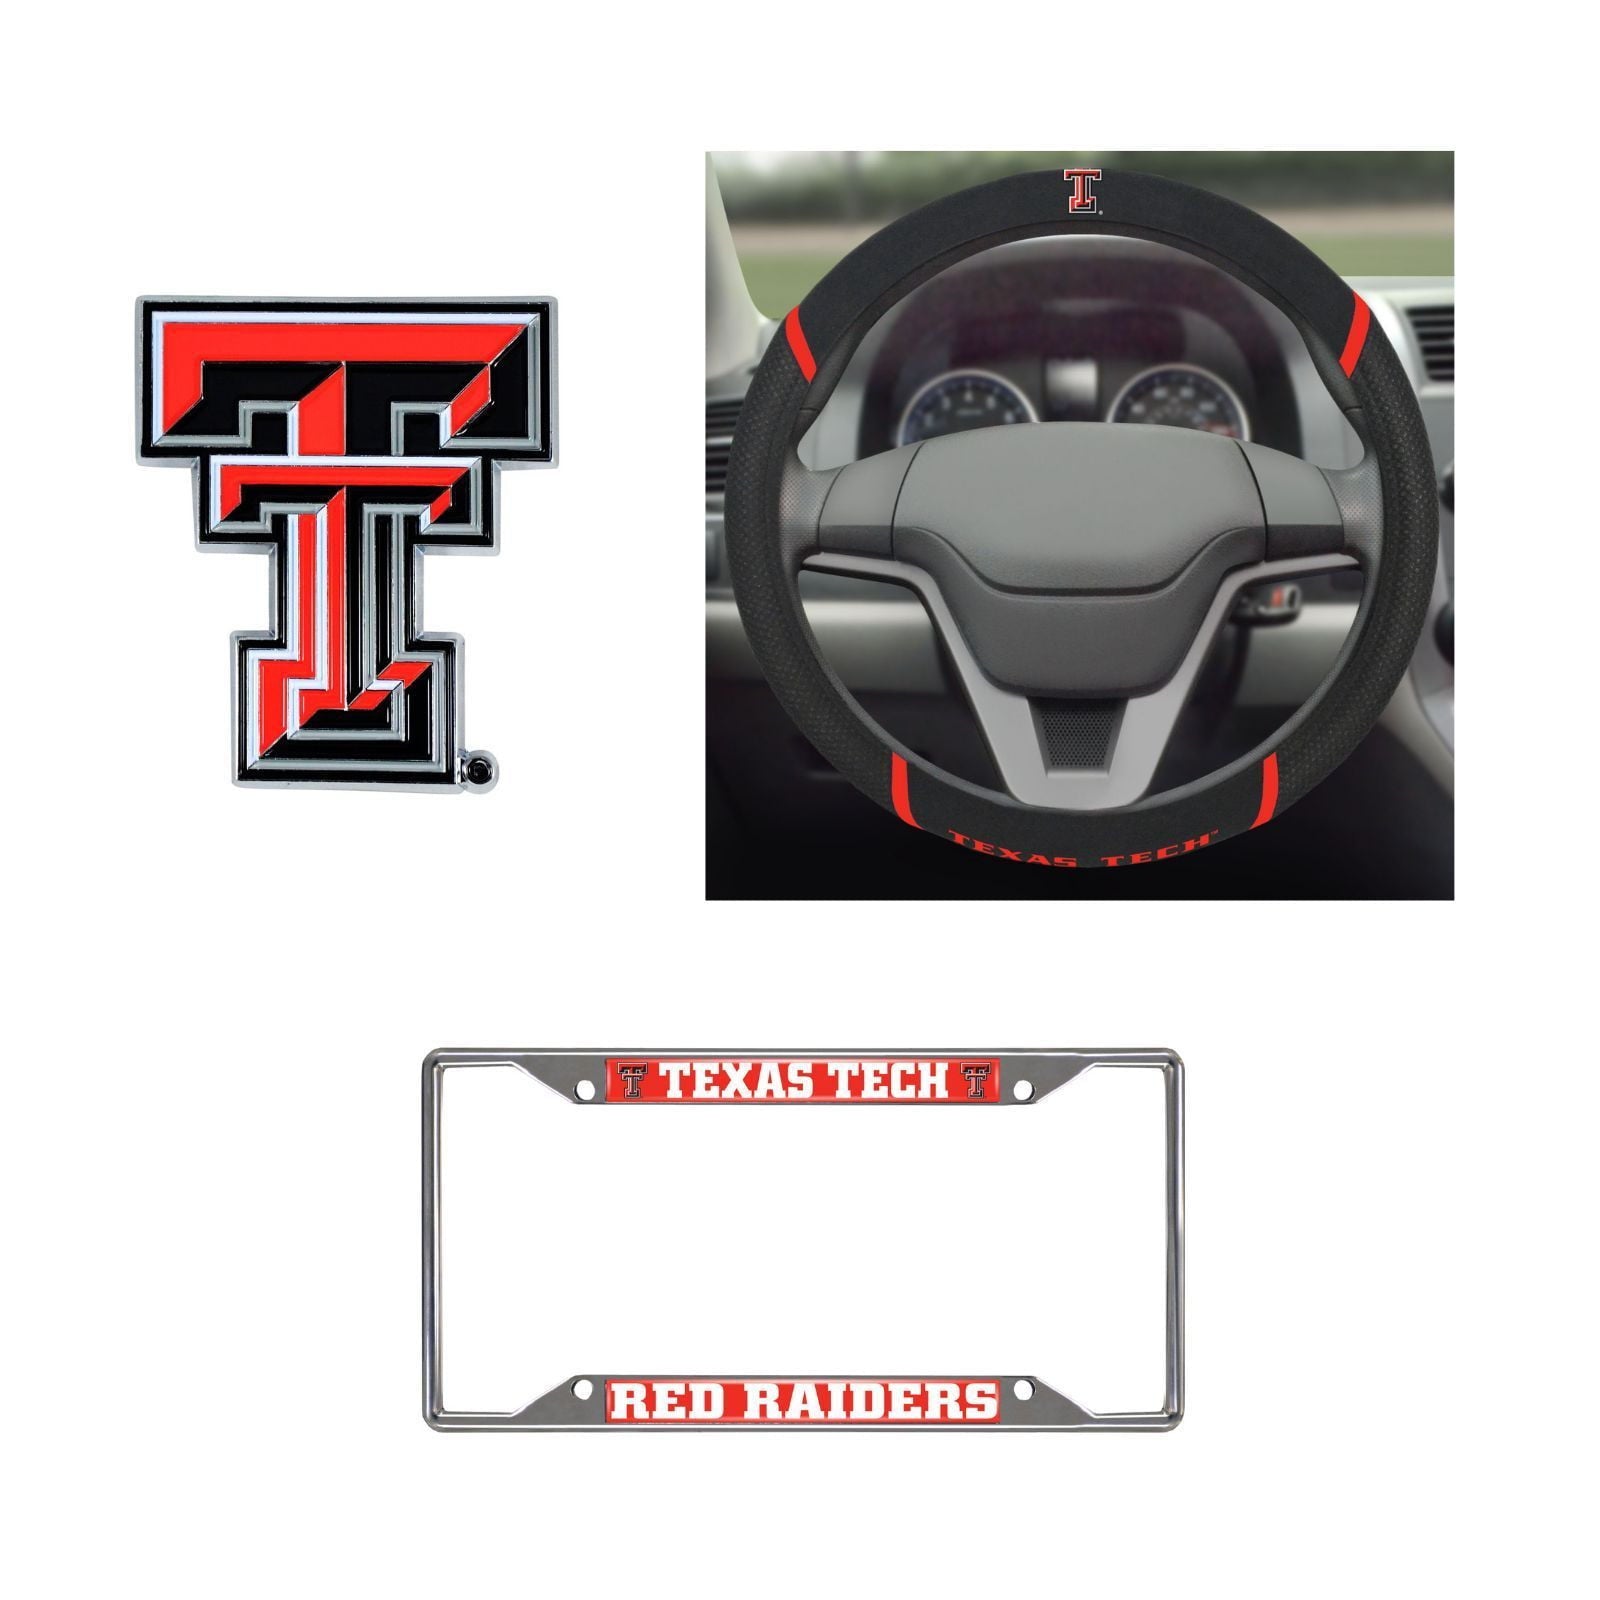 Texas Tech Red Raiders Steering Wheel Cover, License Plate Frame, 3D Color Emblem